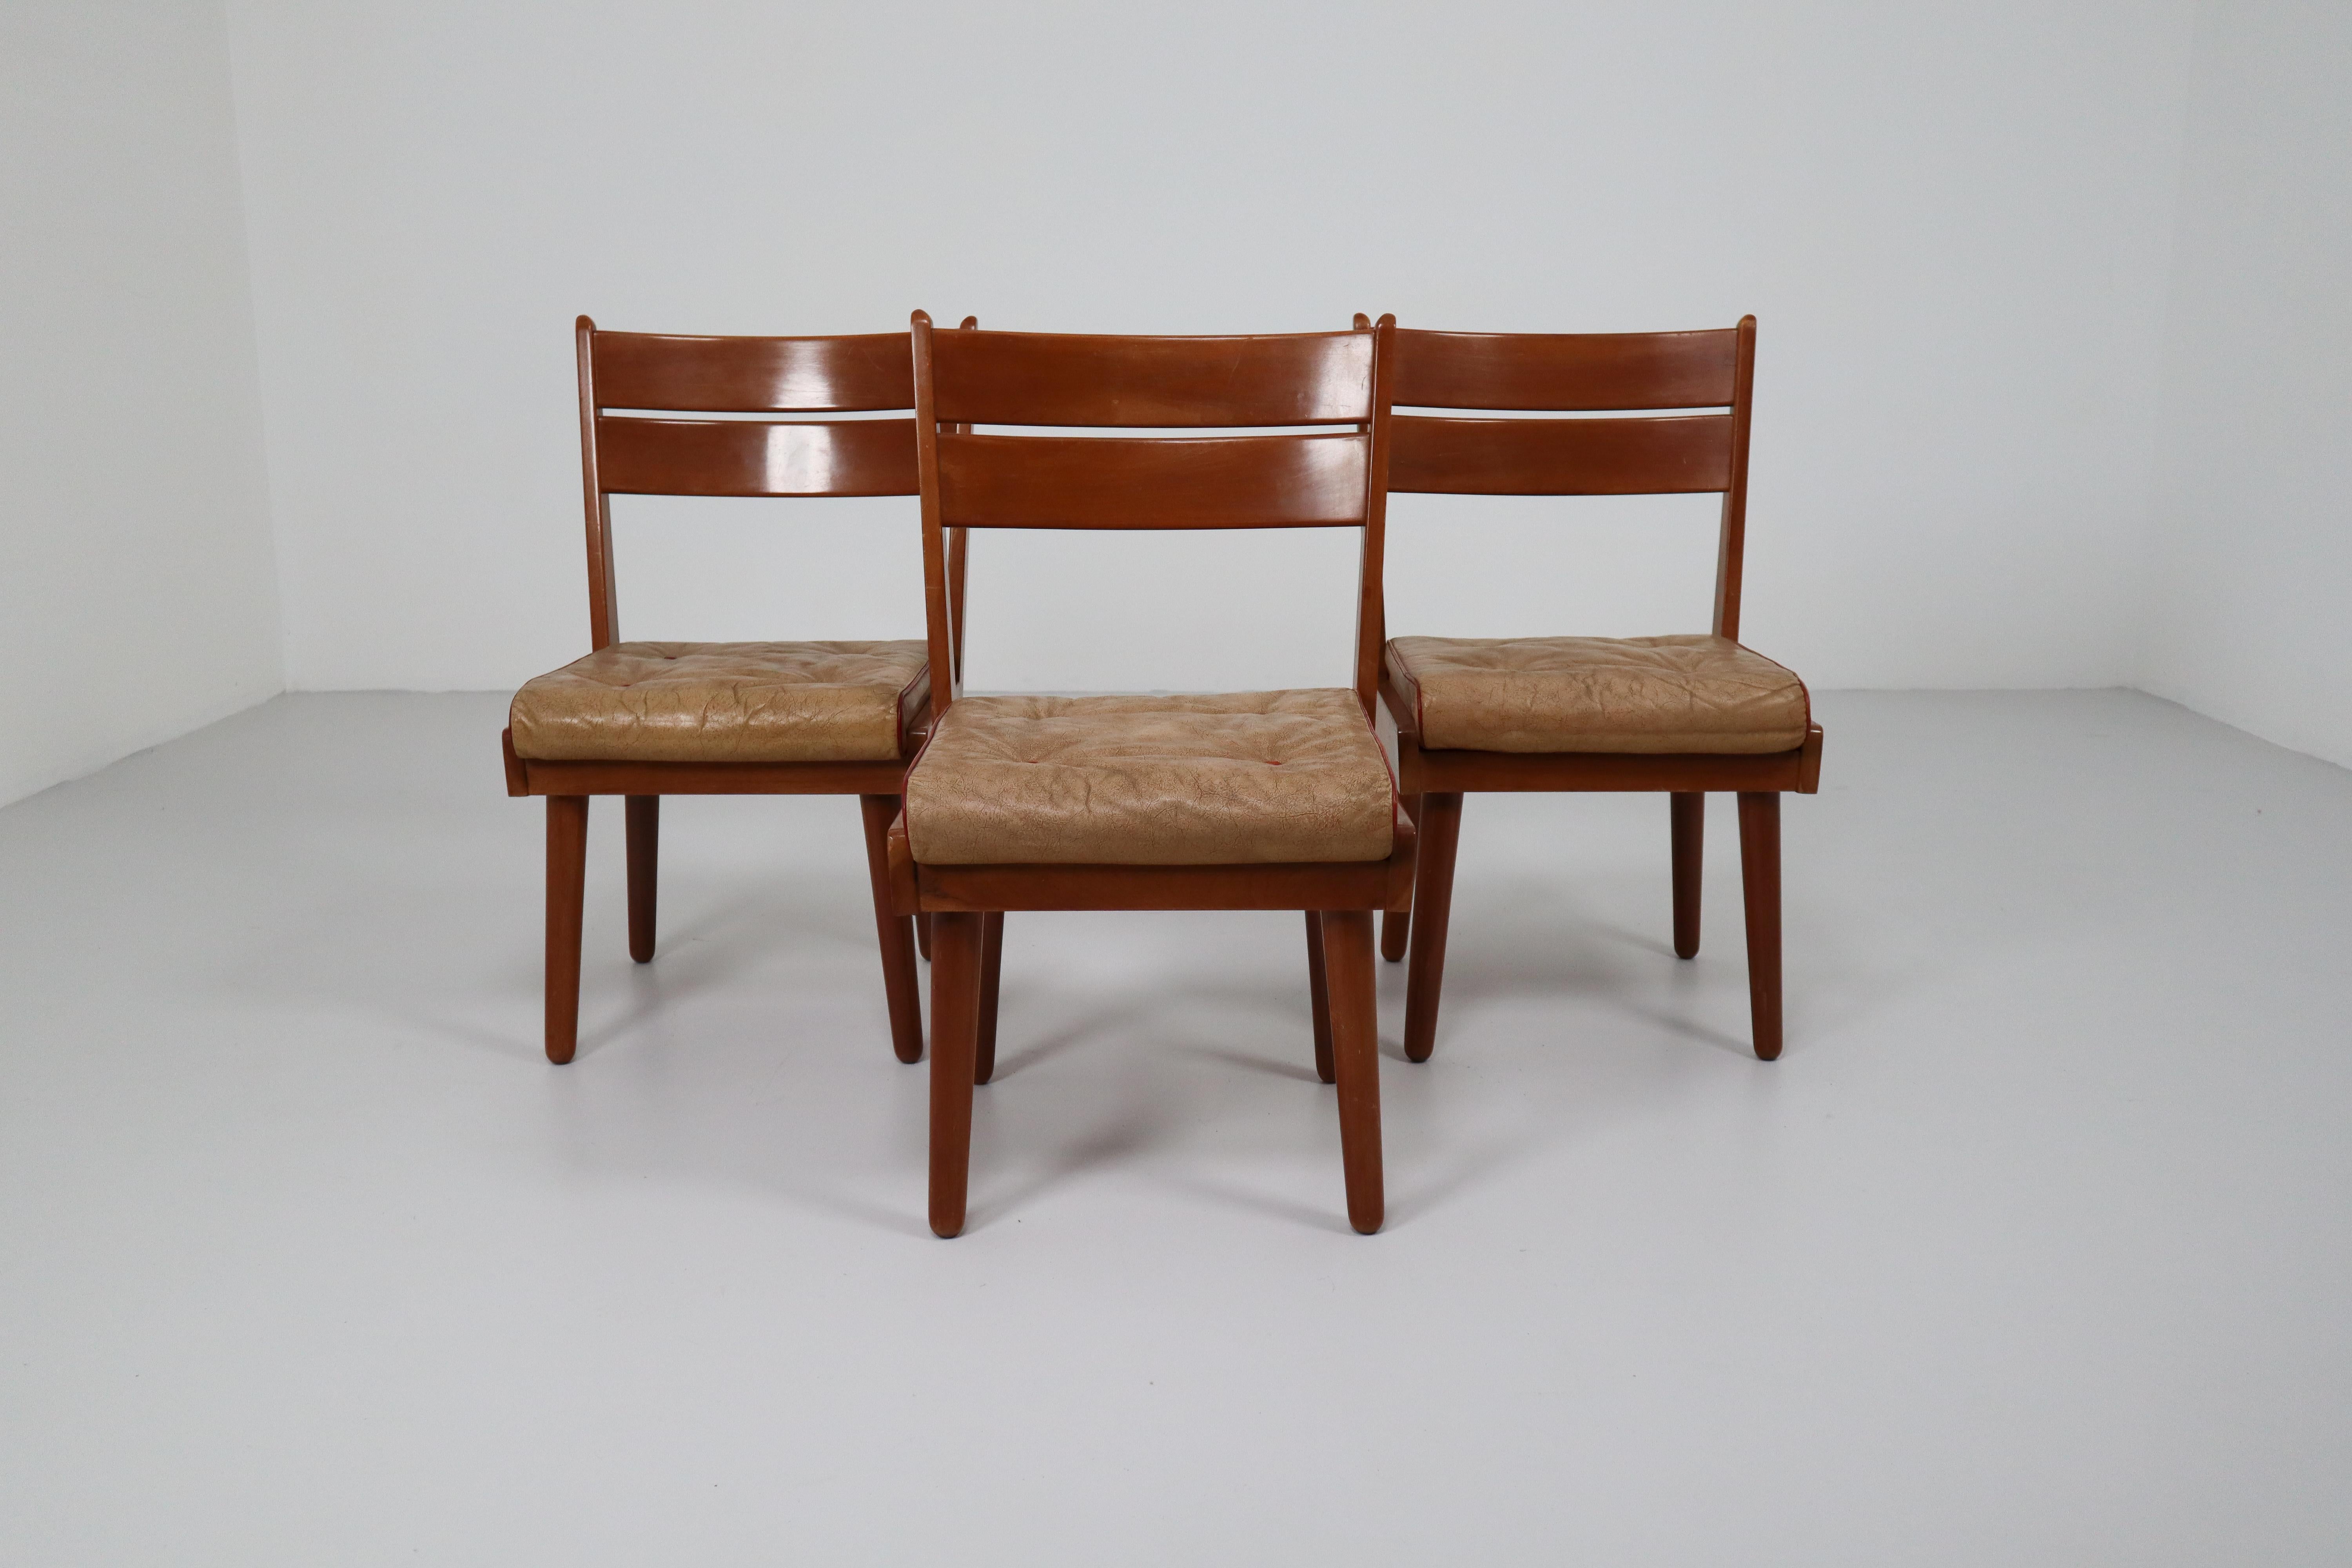 Midcentury Chairs in Walnut and Leather, Austria, 1950s 1